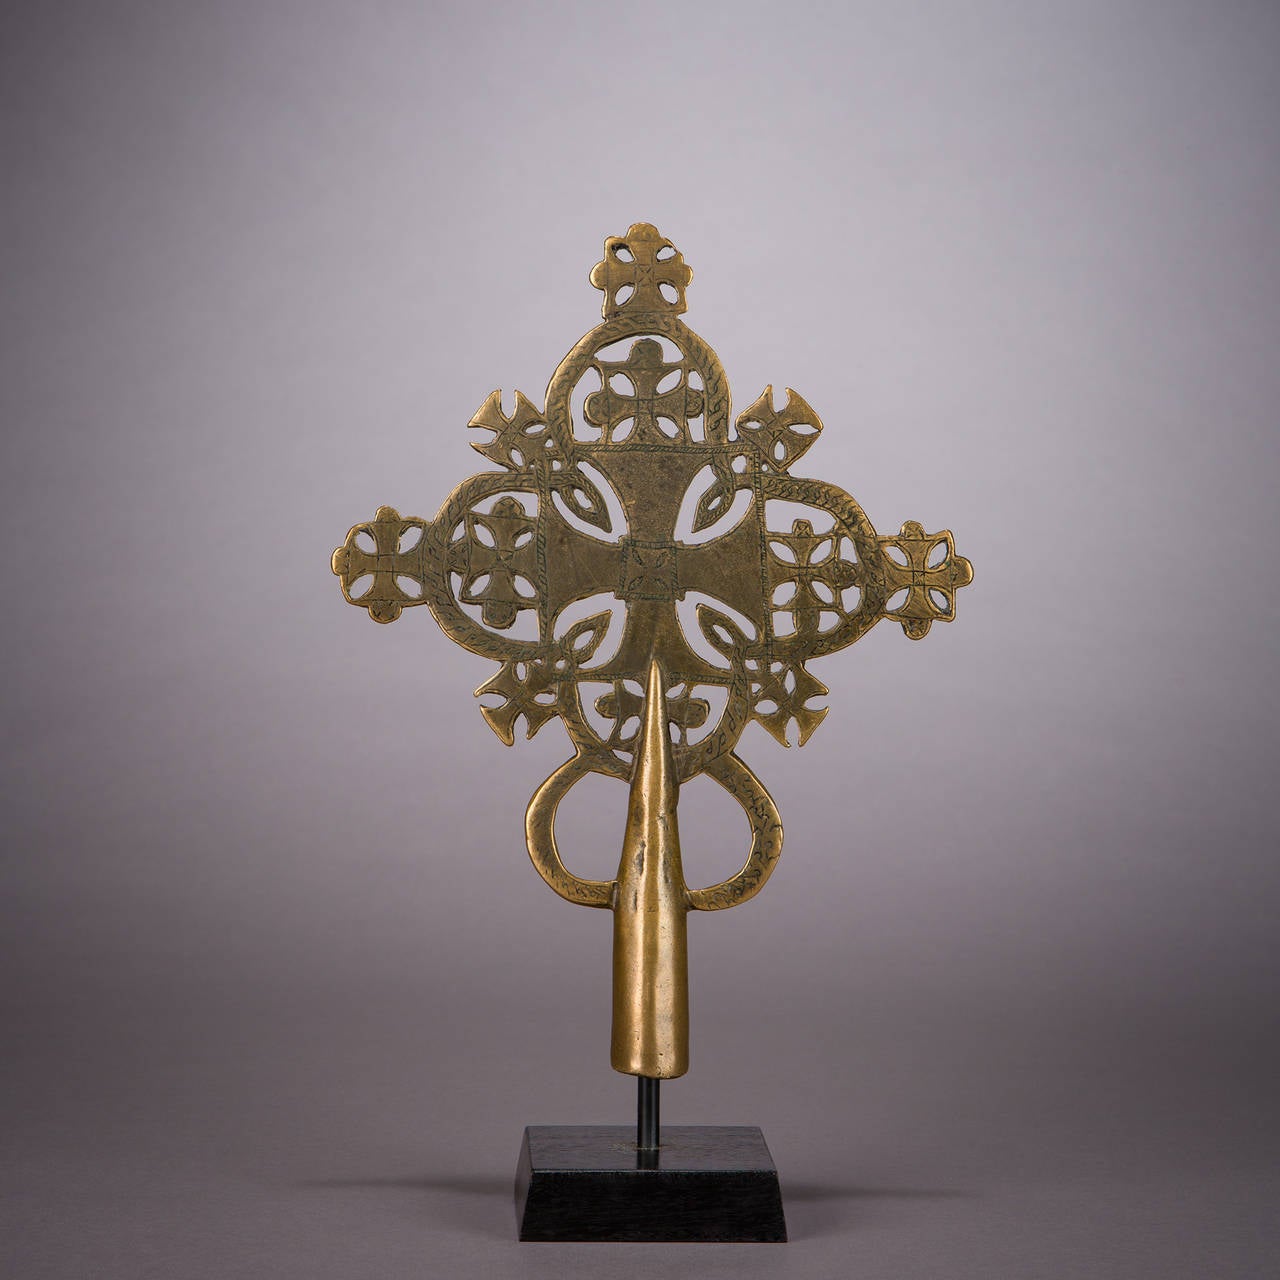 A bronze processional hand cross, Northern Ethiopia, 14th-15th century.

Ethiopian hand crosses are coveted by collectors of medieval art, religious art and tribal art for their beauty and variety of forms.

Ethiopia was probably the second